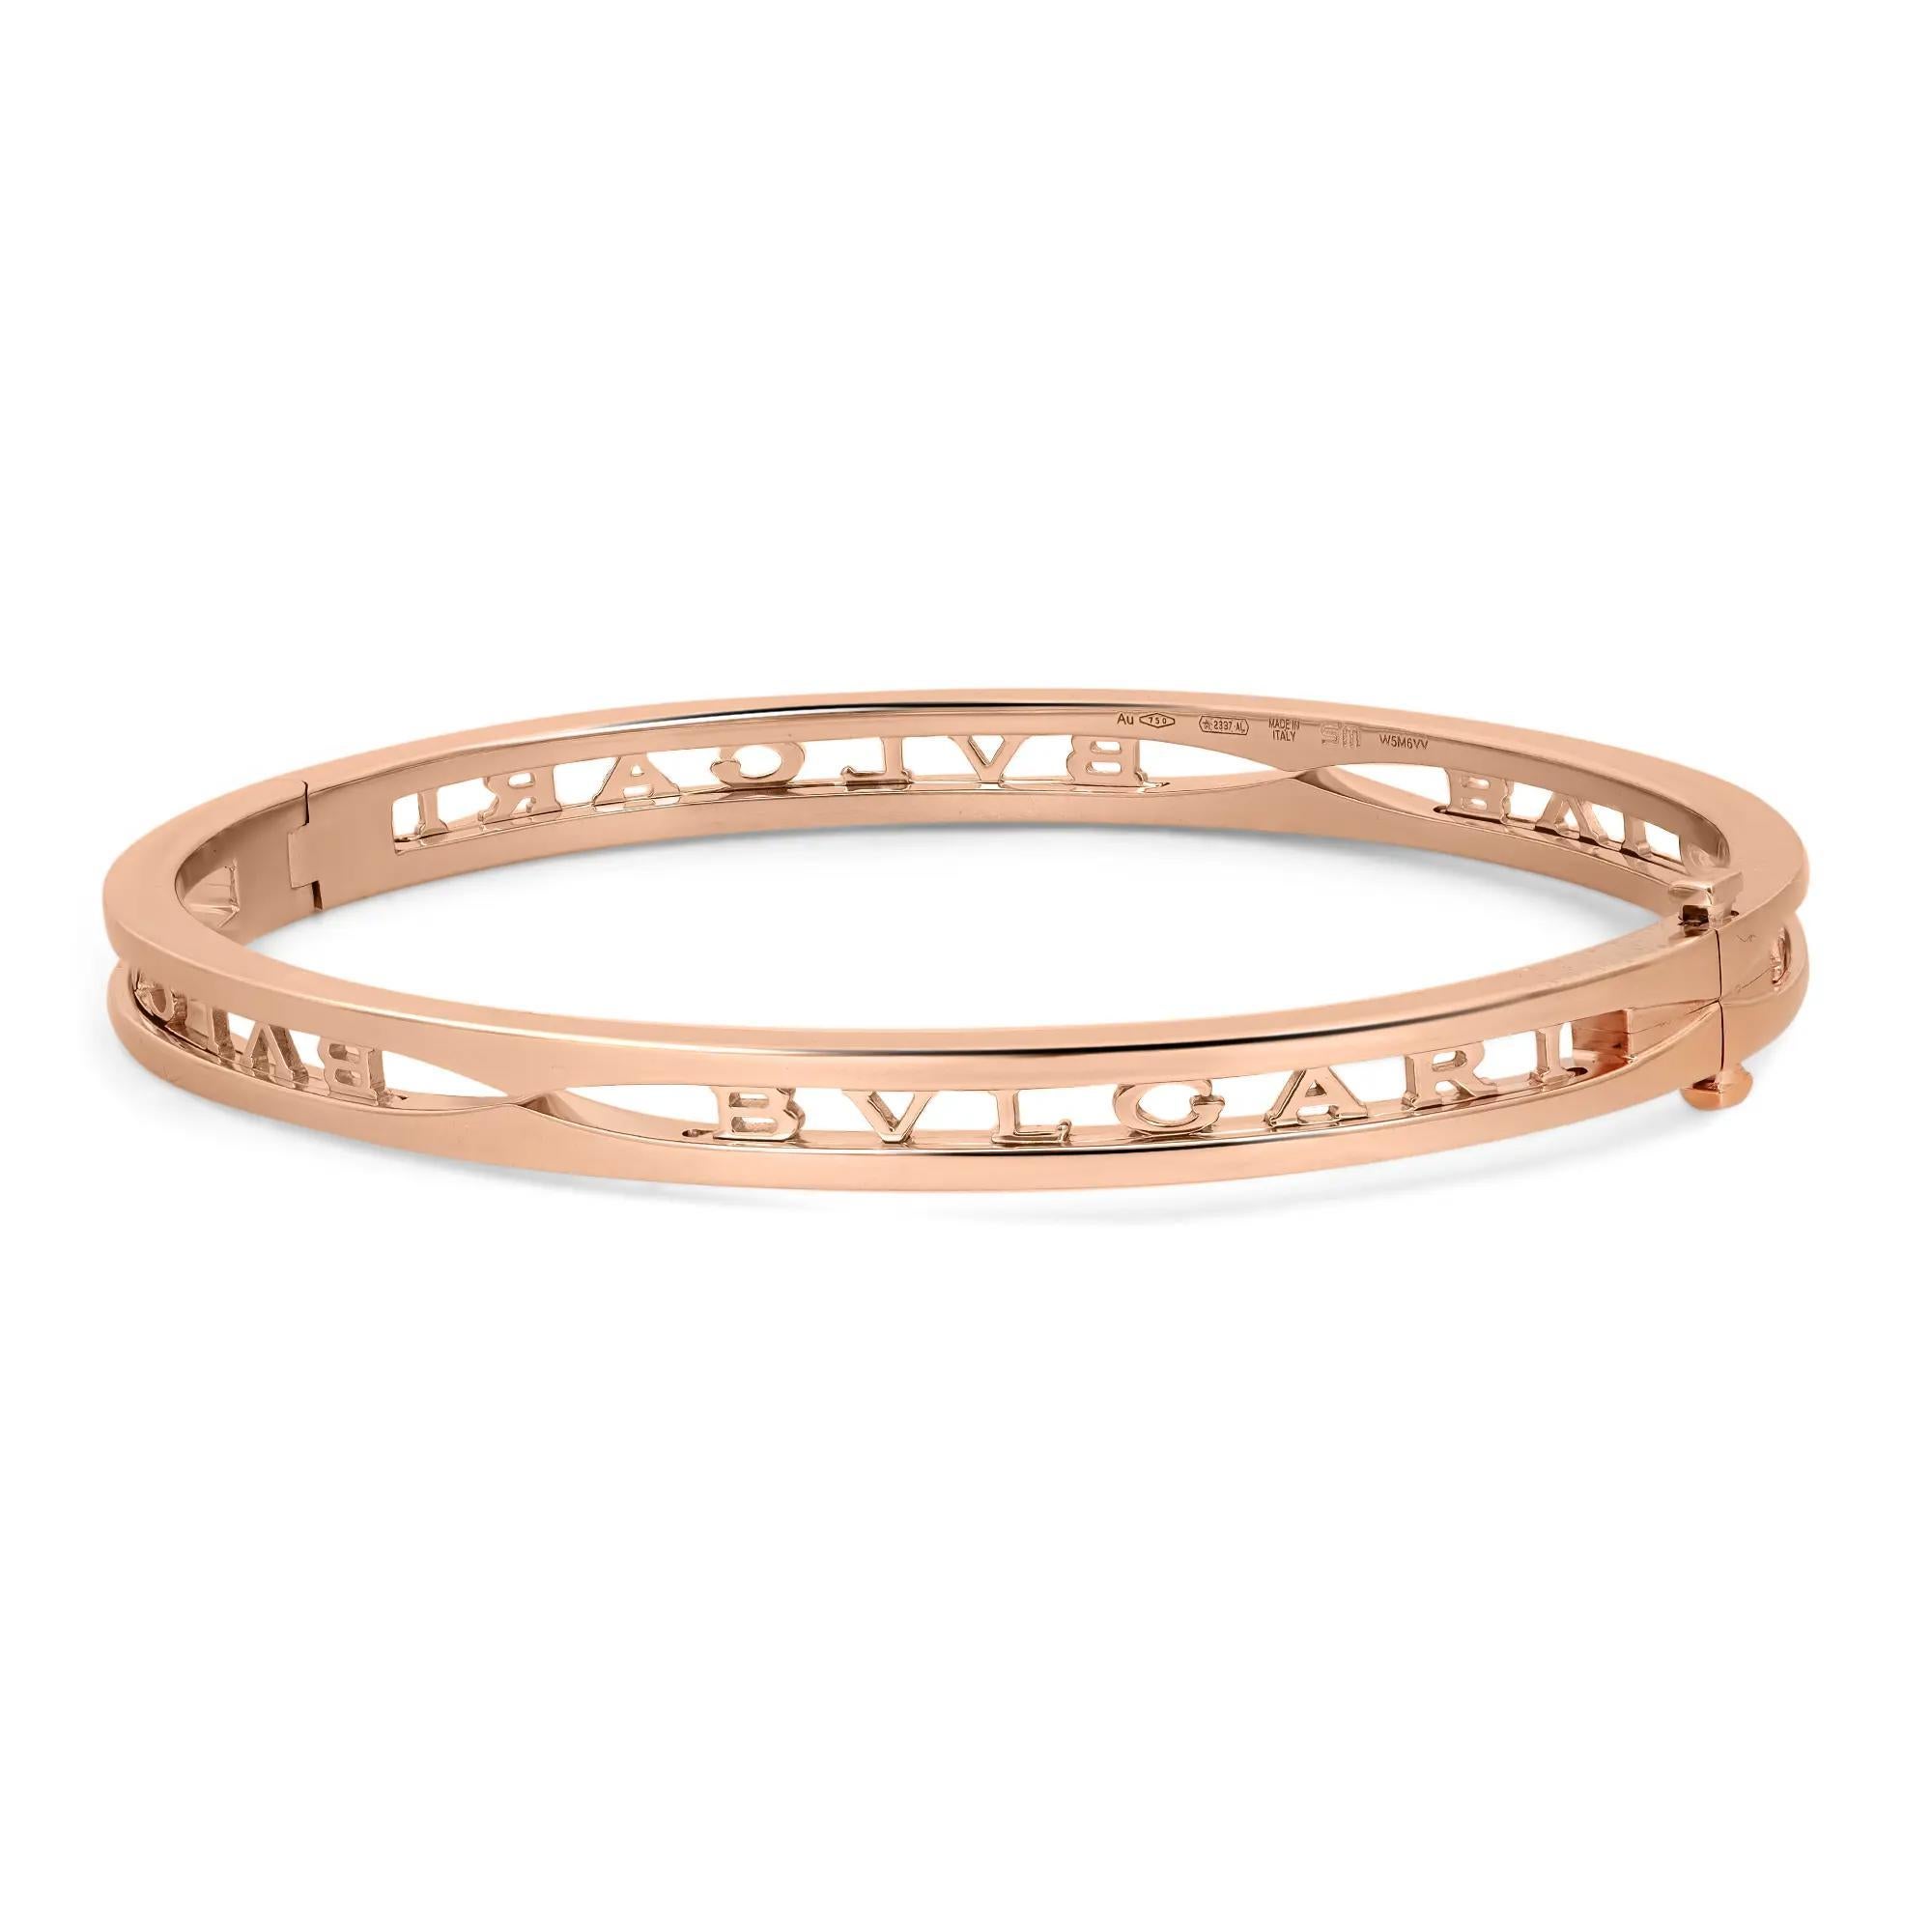 Bold and beautiful, this bracelet is a true essence of jewelry aesthetics. Crafted in lustrous 18K rose gold. This bracelet features an oval-shaped bangle with the Bvlgari logo cut out. Super stackable and easy to wear. Size: Small ( fits up to 6.5